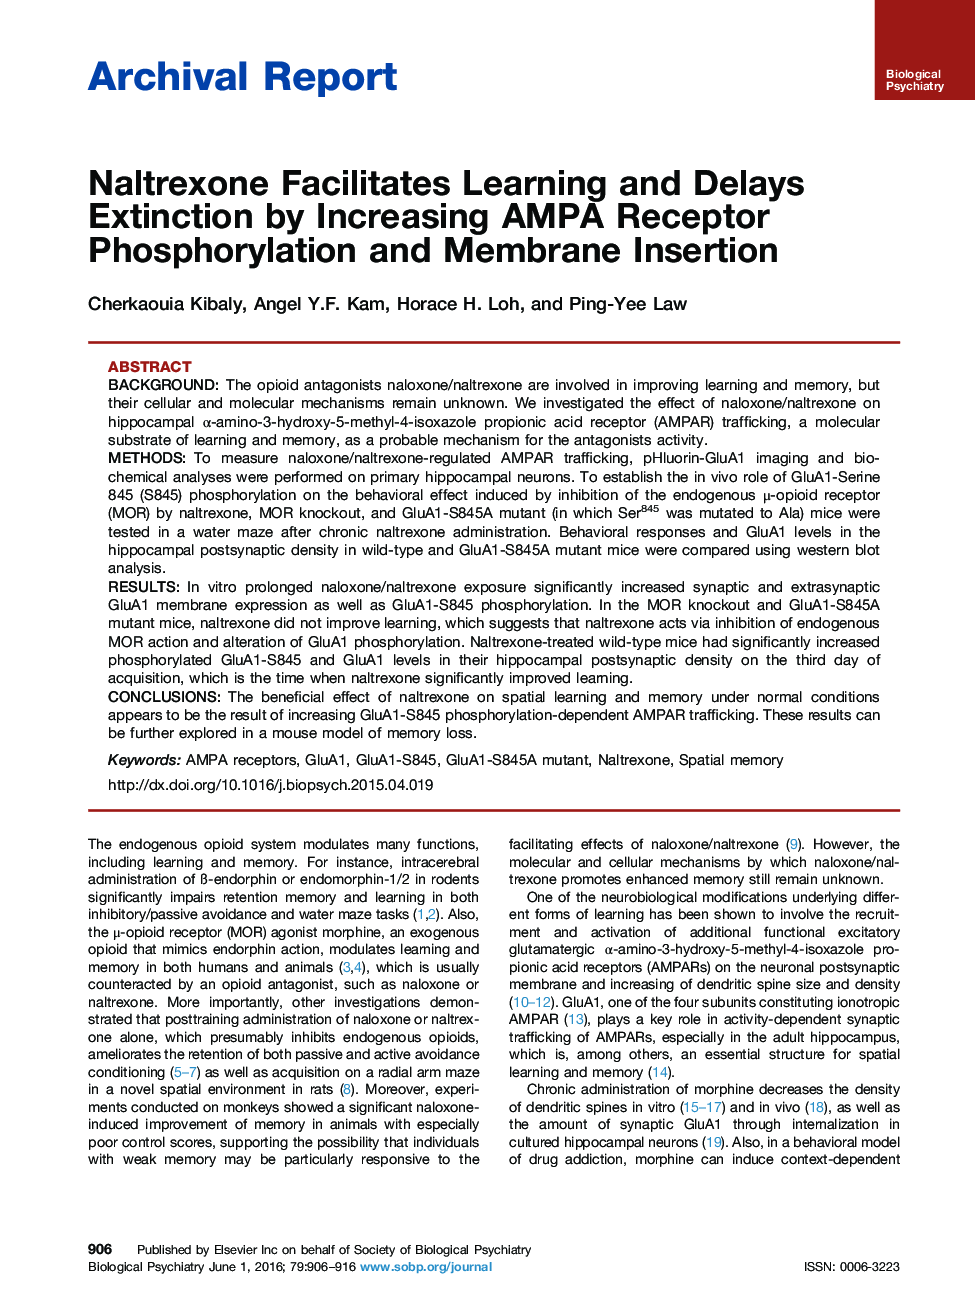 Naltrexone Facilitates Learning and Delays Extinction by Increasing AMPA Receptor Phosphorylation and Membrane Insertion